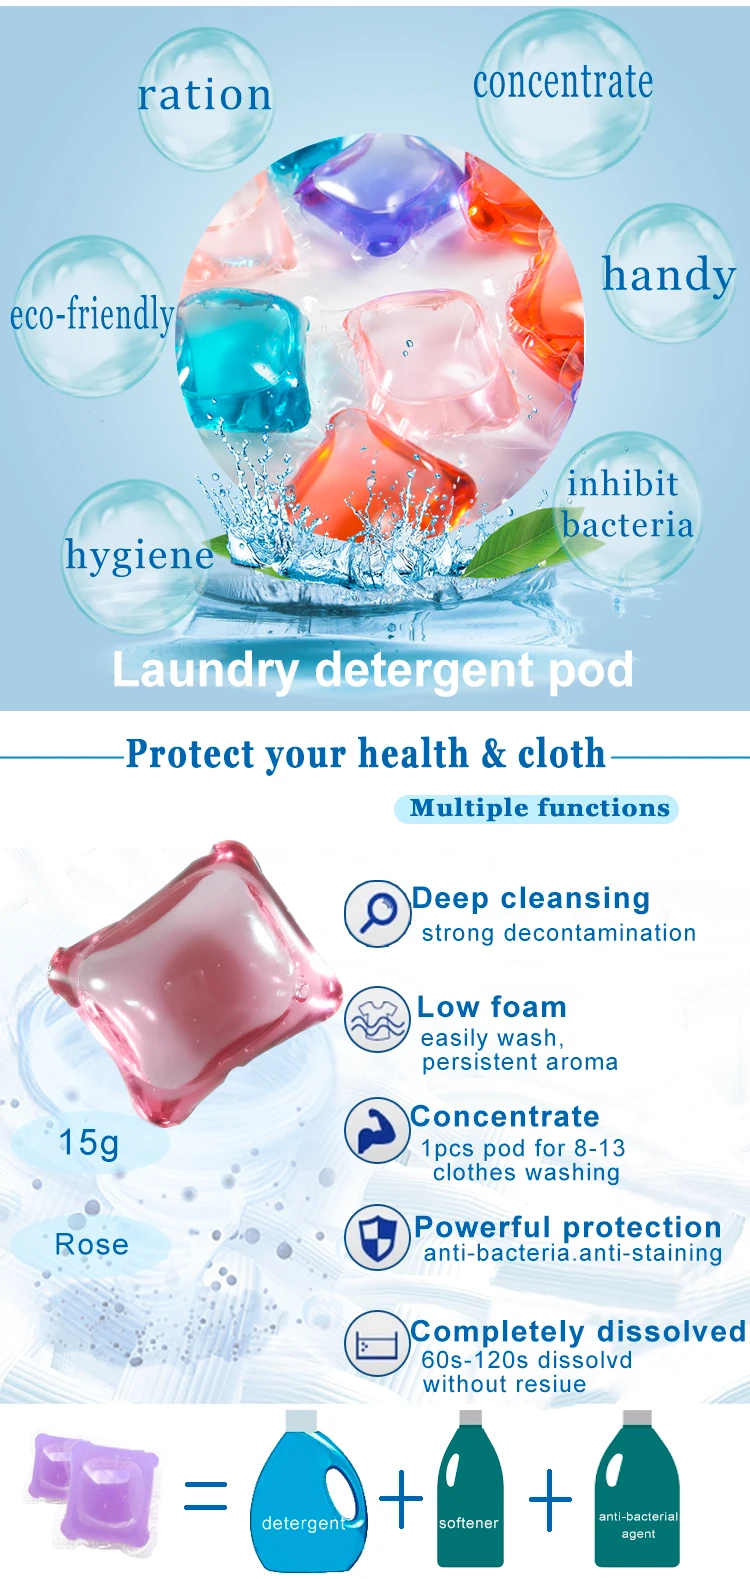 Clothes liquid laundry detergent for clothes cleaning 5 gallon laundry detergent